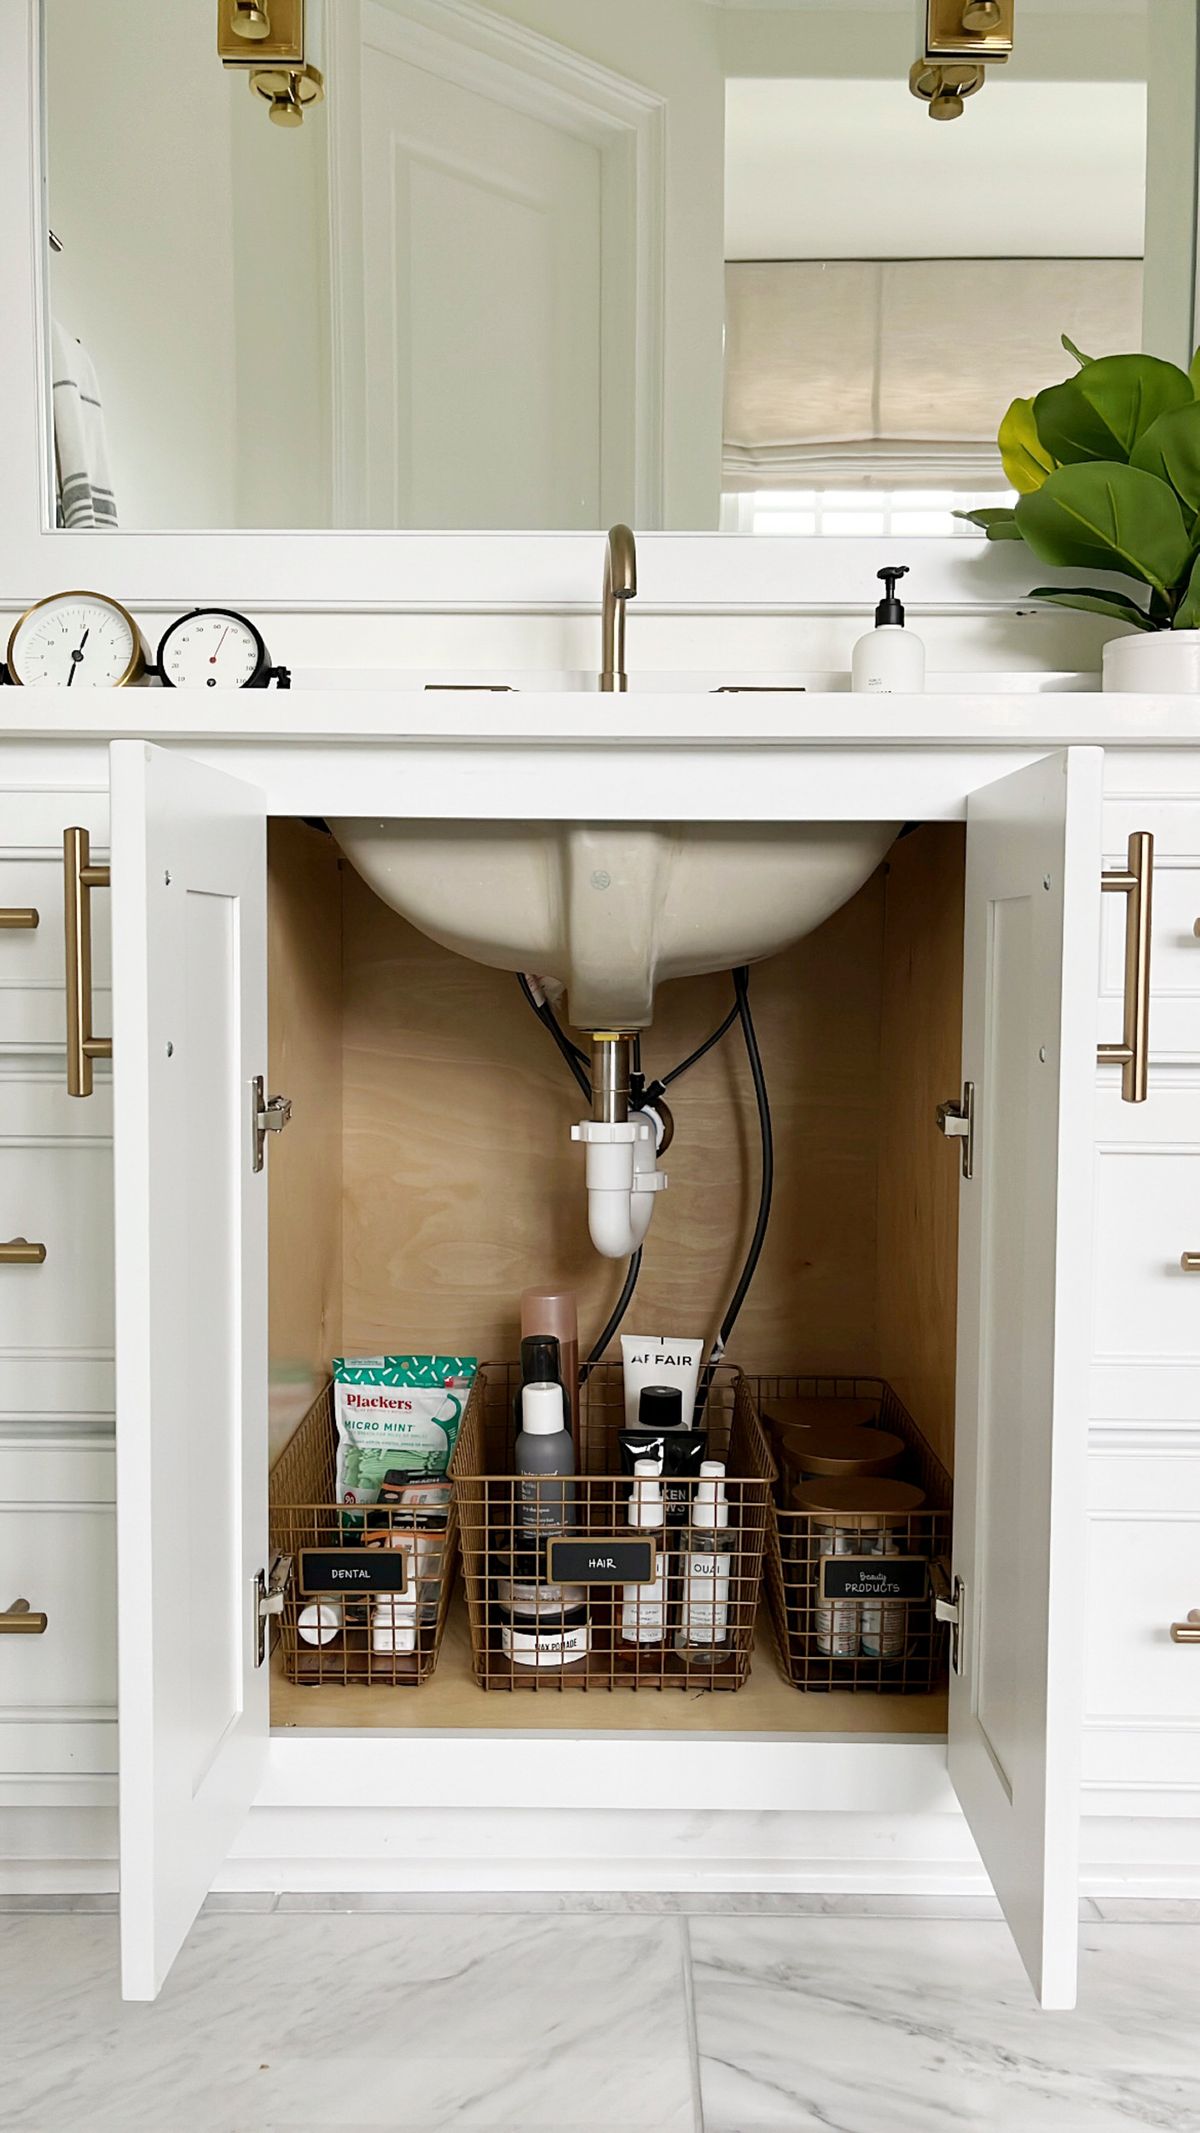 23 Plastic Storage Cabinets That Will Rid Your Space of Clutter Once and  For All